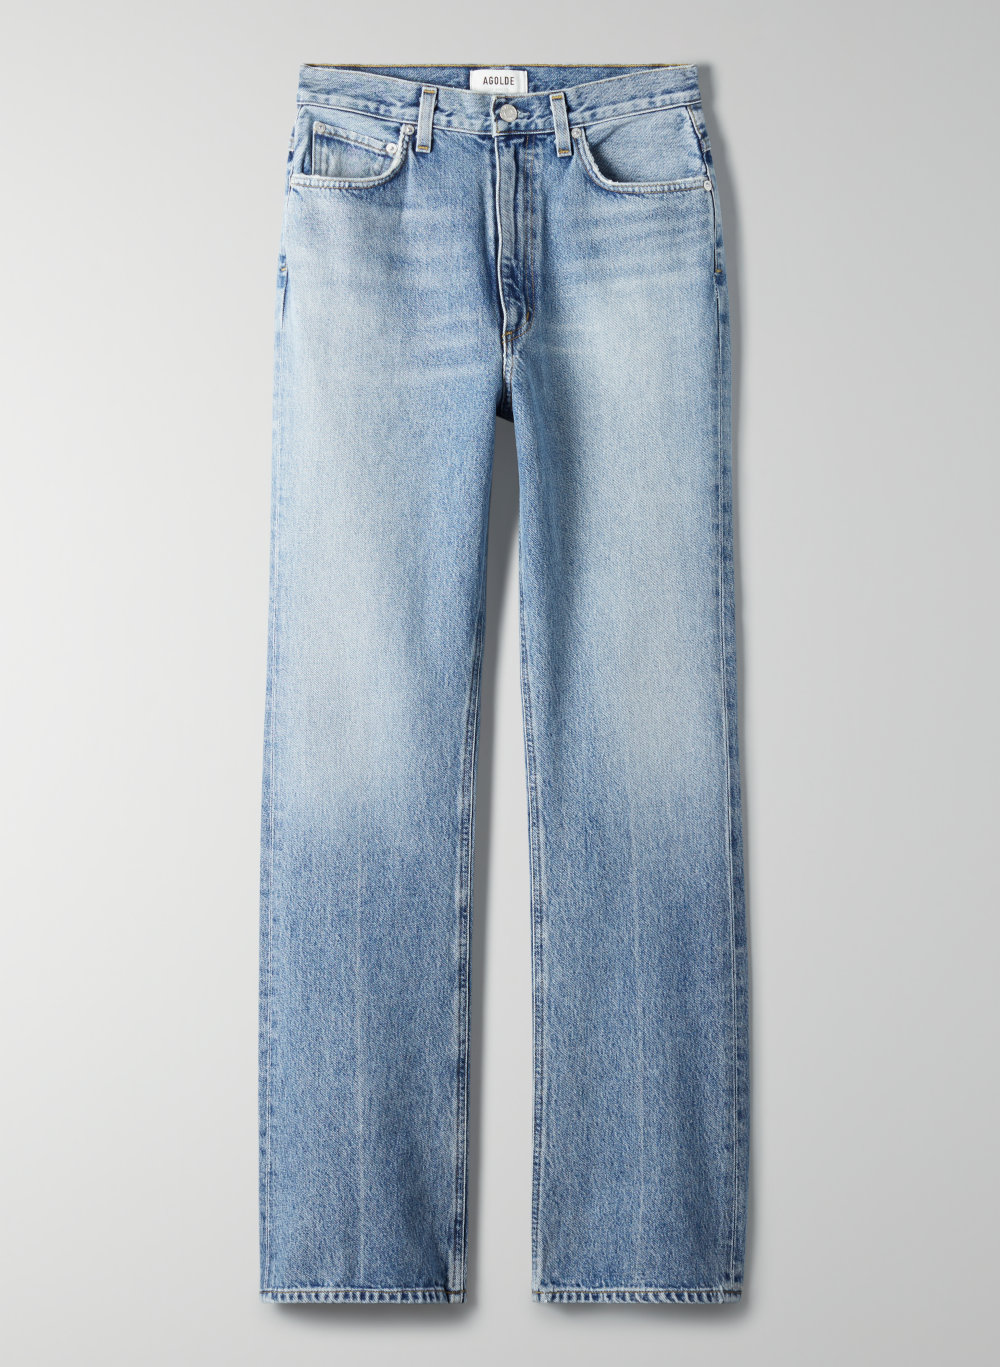 old fashioned high waisted jeans